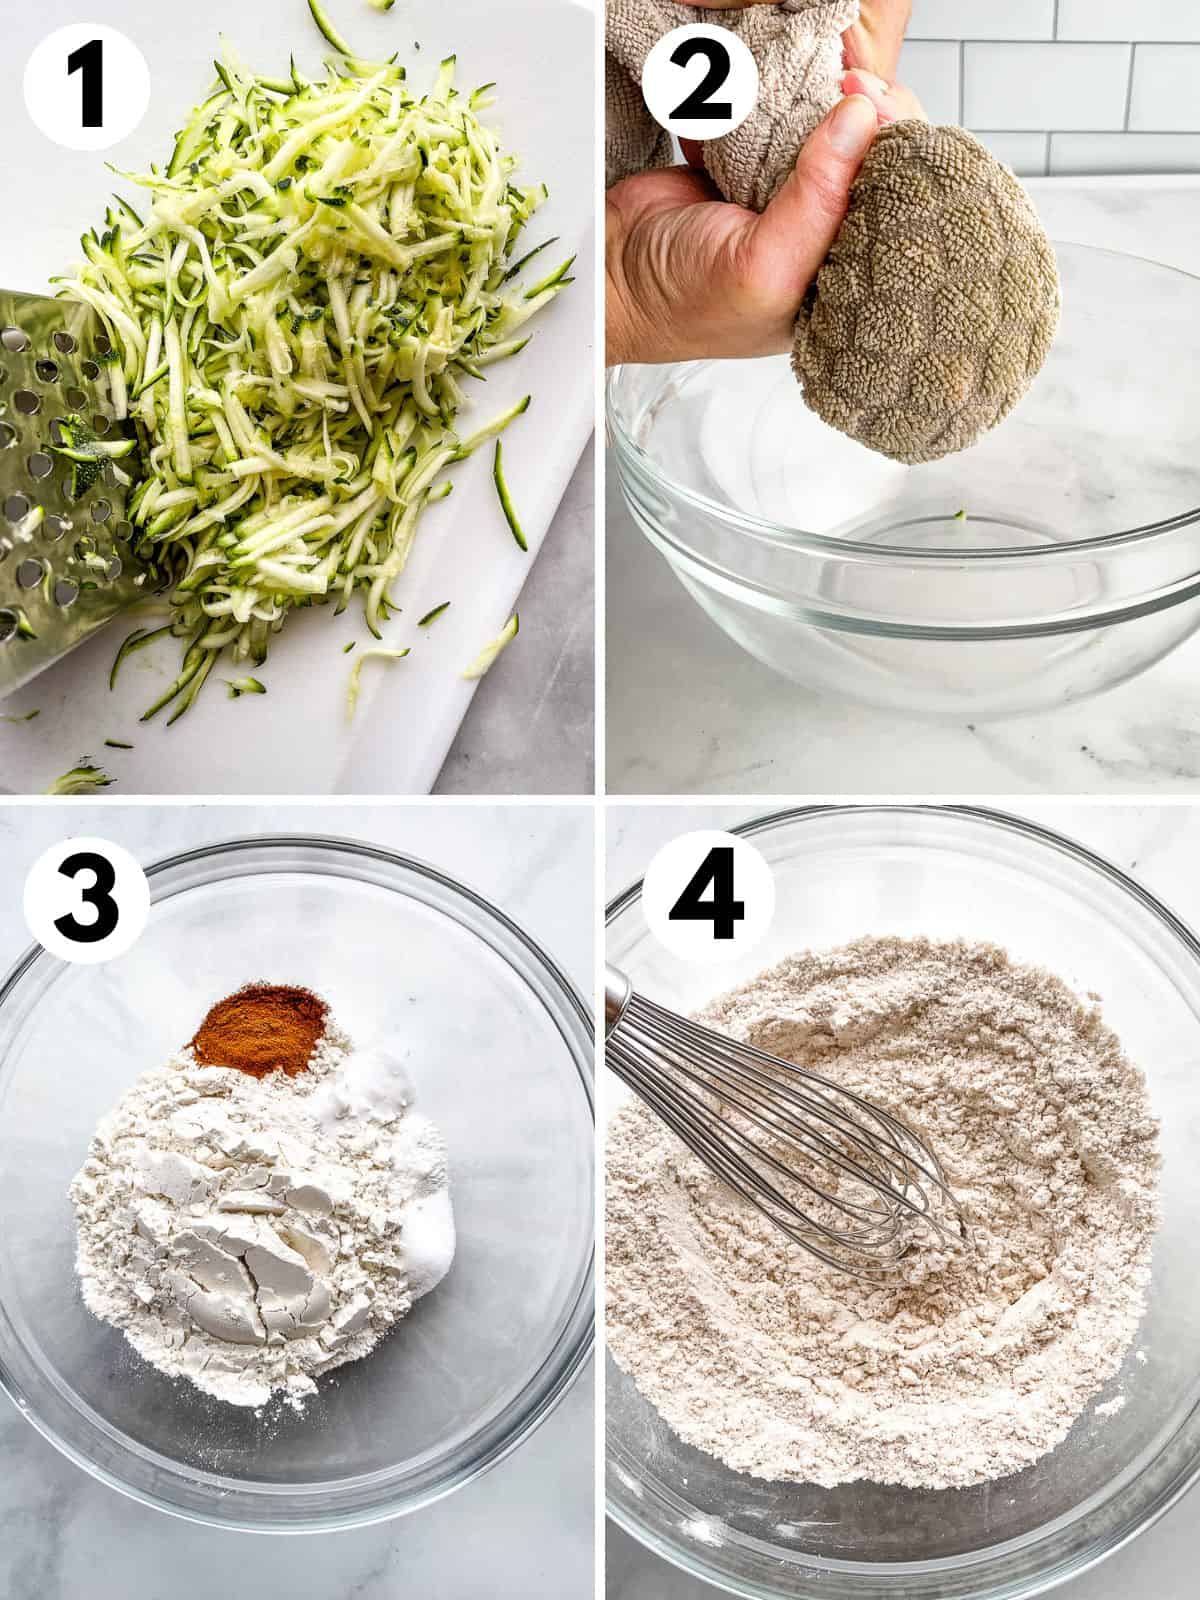 Steps one through four of making gluten-free zucchini bread. 1. Shredding zucchini. 2. Wringing it dry in a towel over a bowl. 3. Dry ingredients in a bowl. 4. Whisking the dry ingredients together.